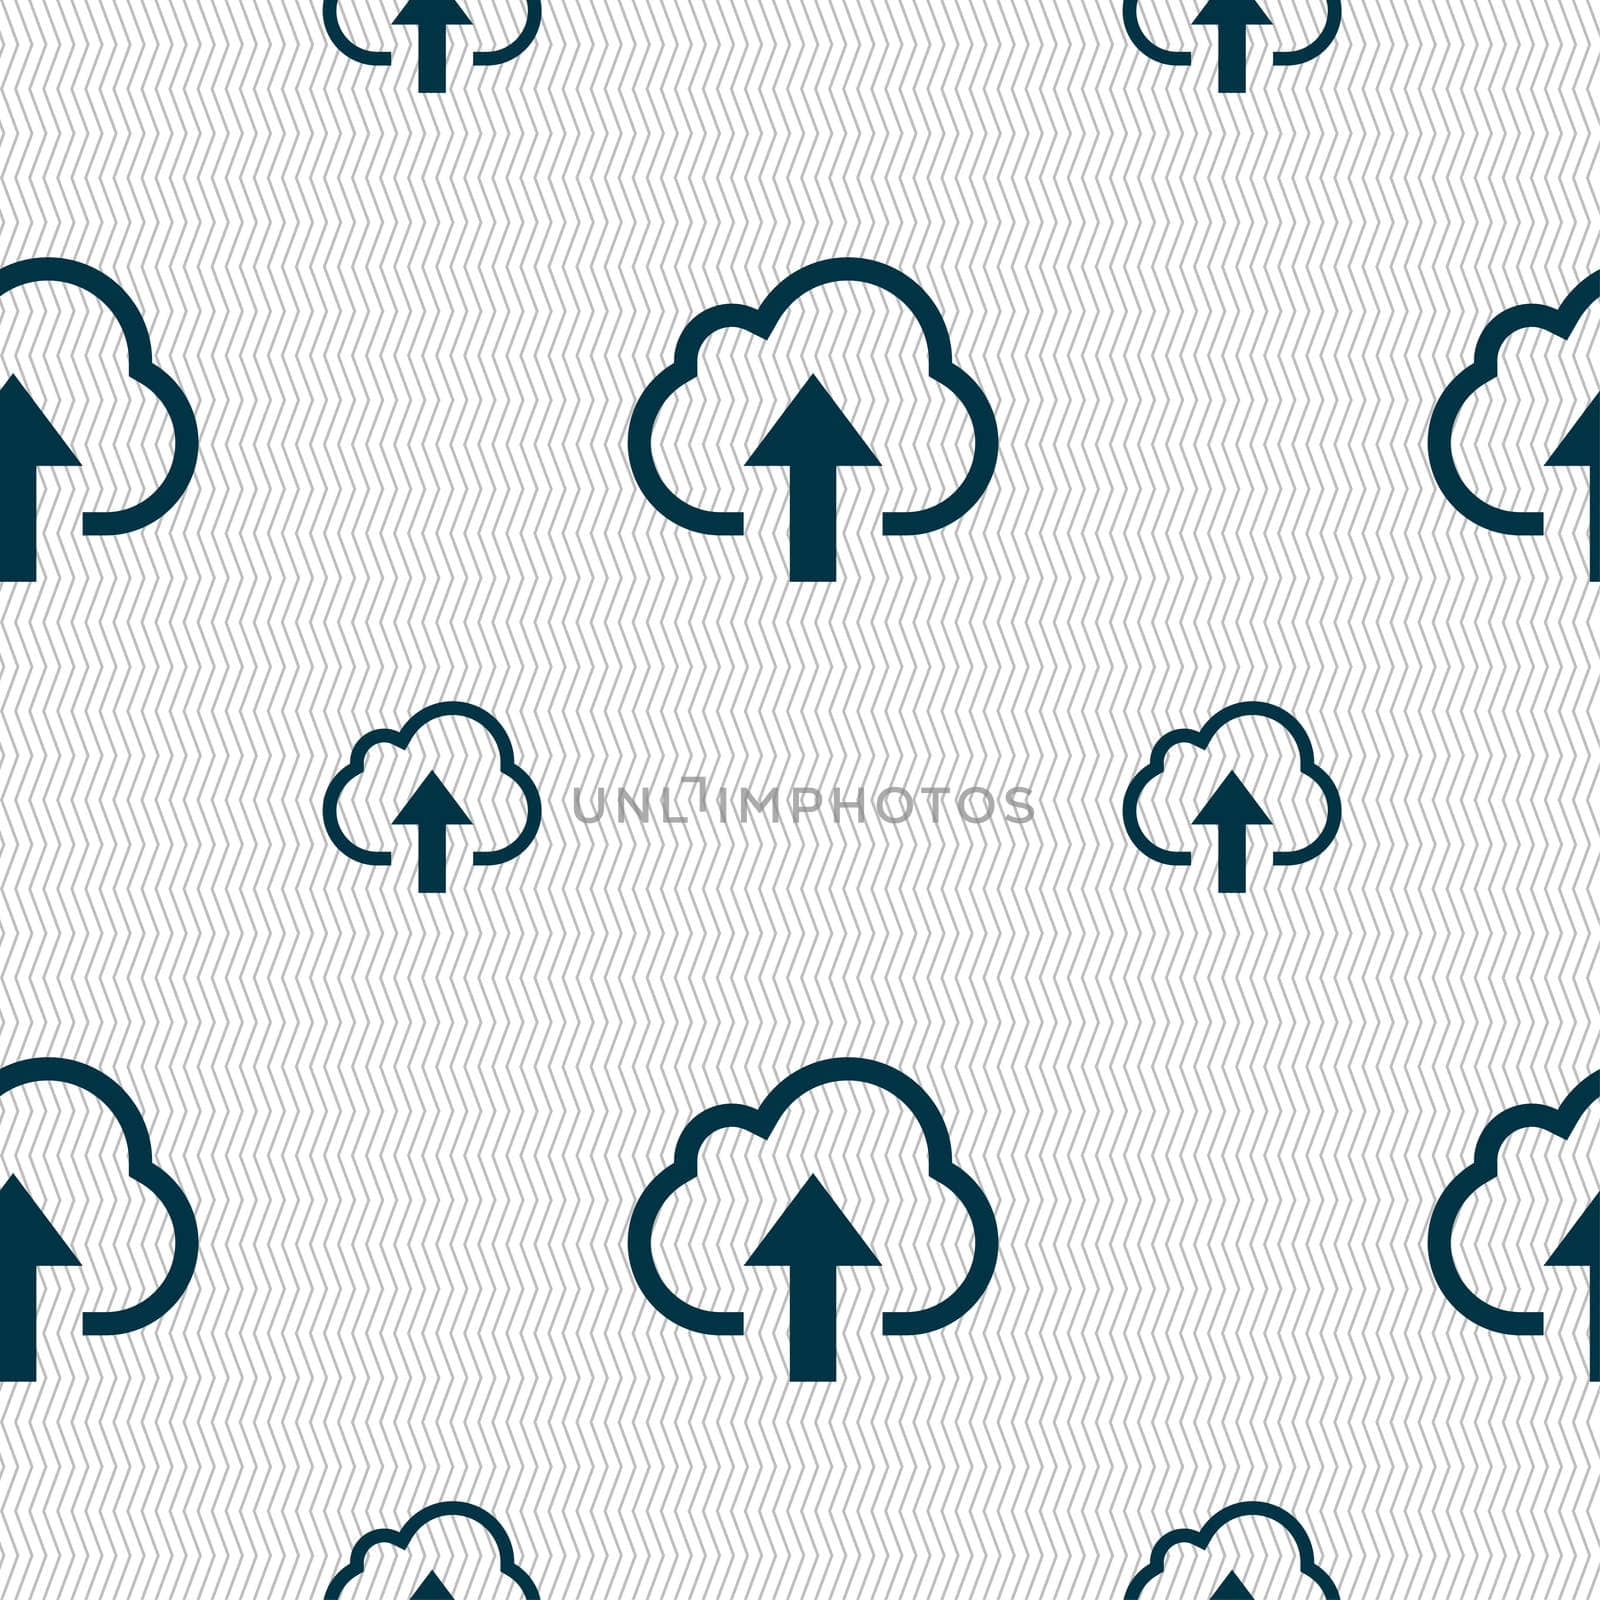 Upload from cloud icon sign. Seamless pattern with geometric texture. illustration